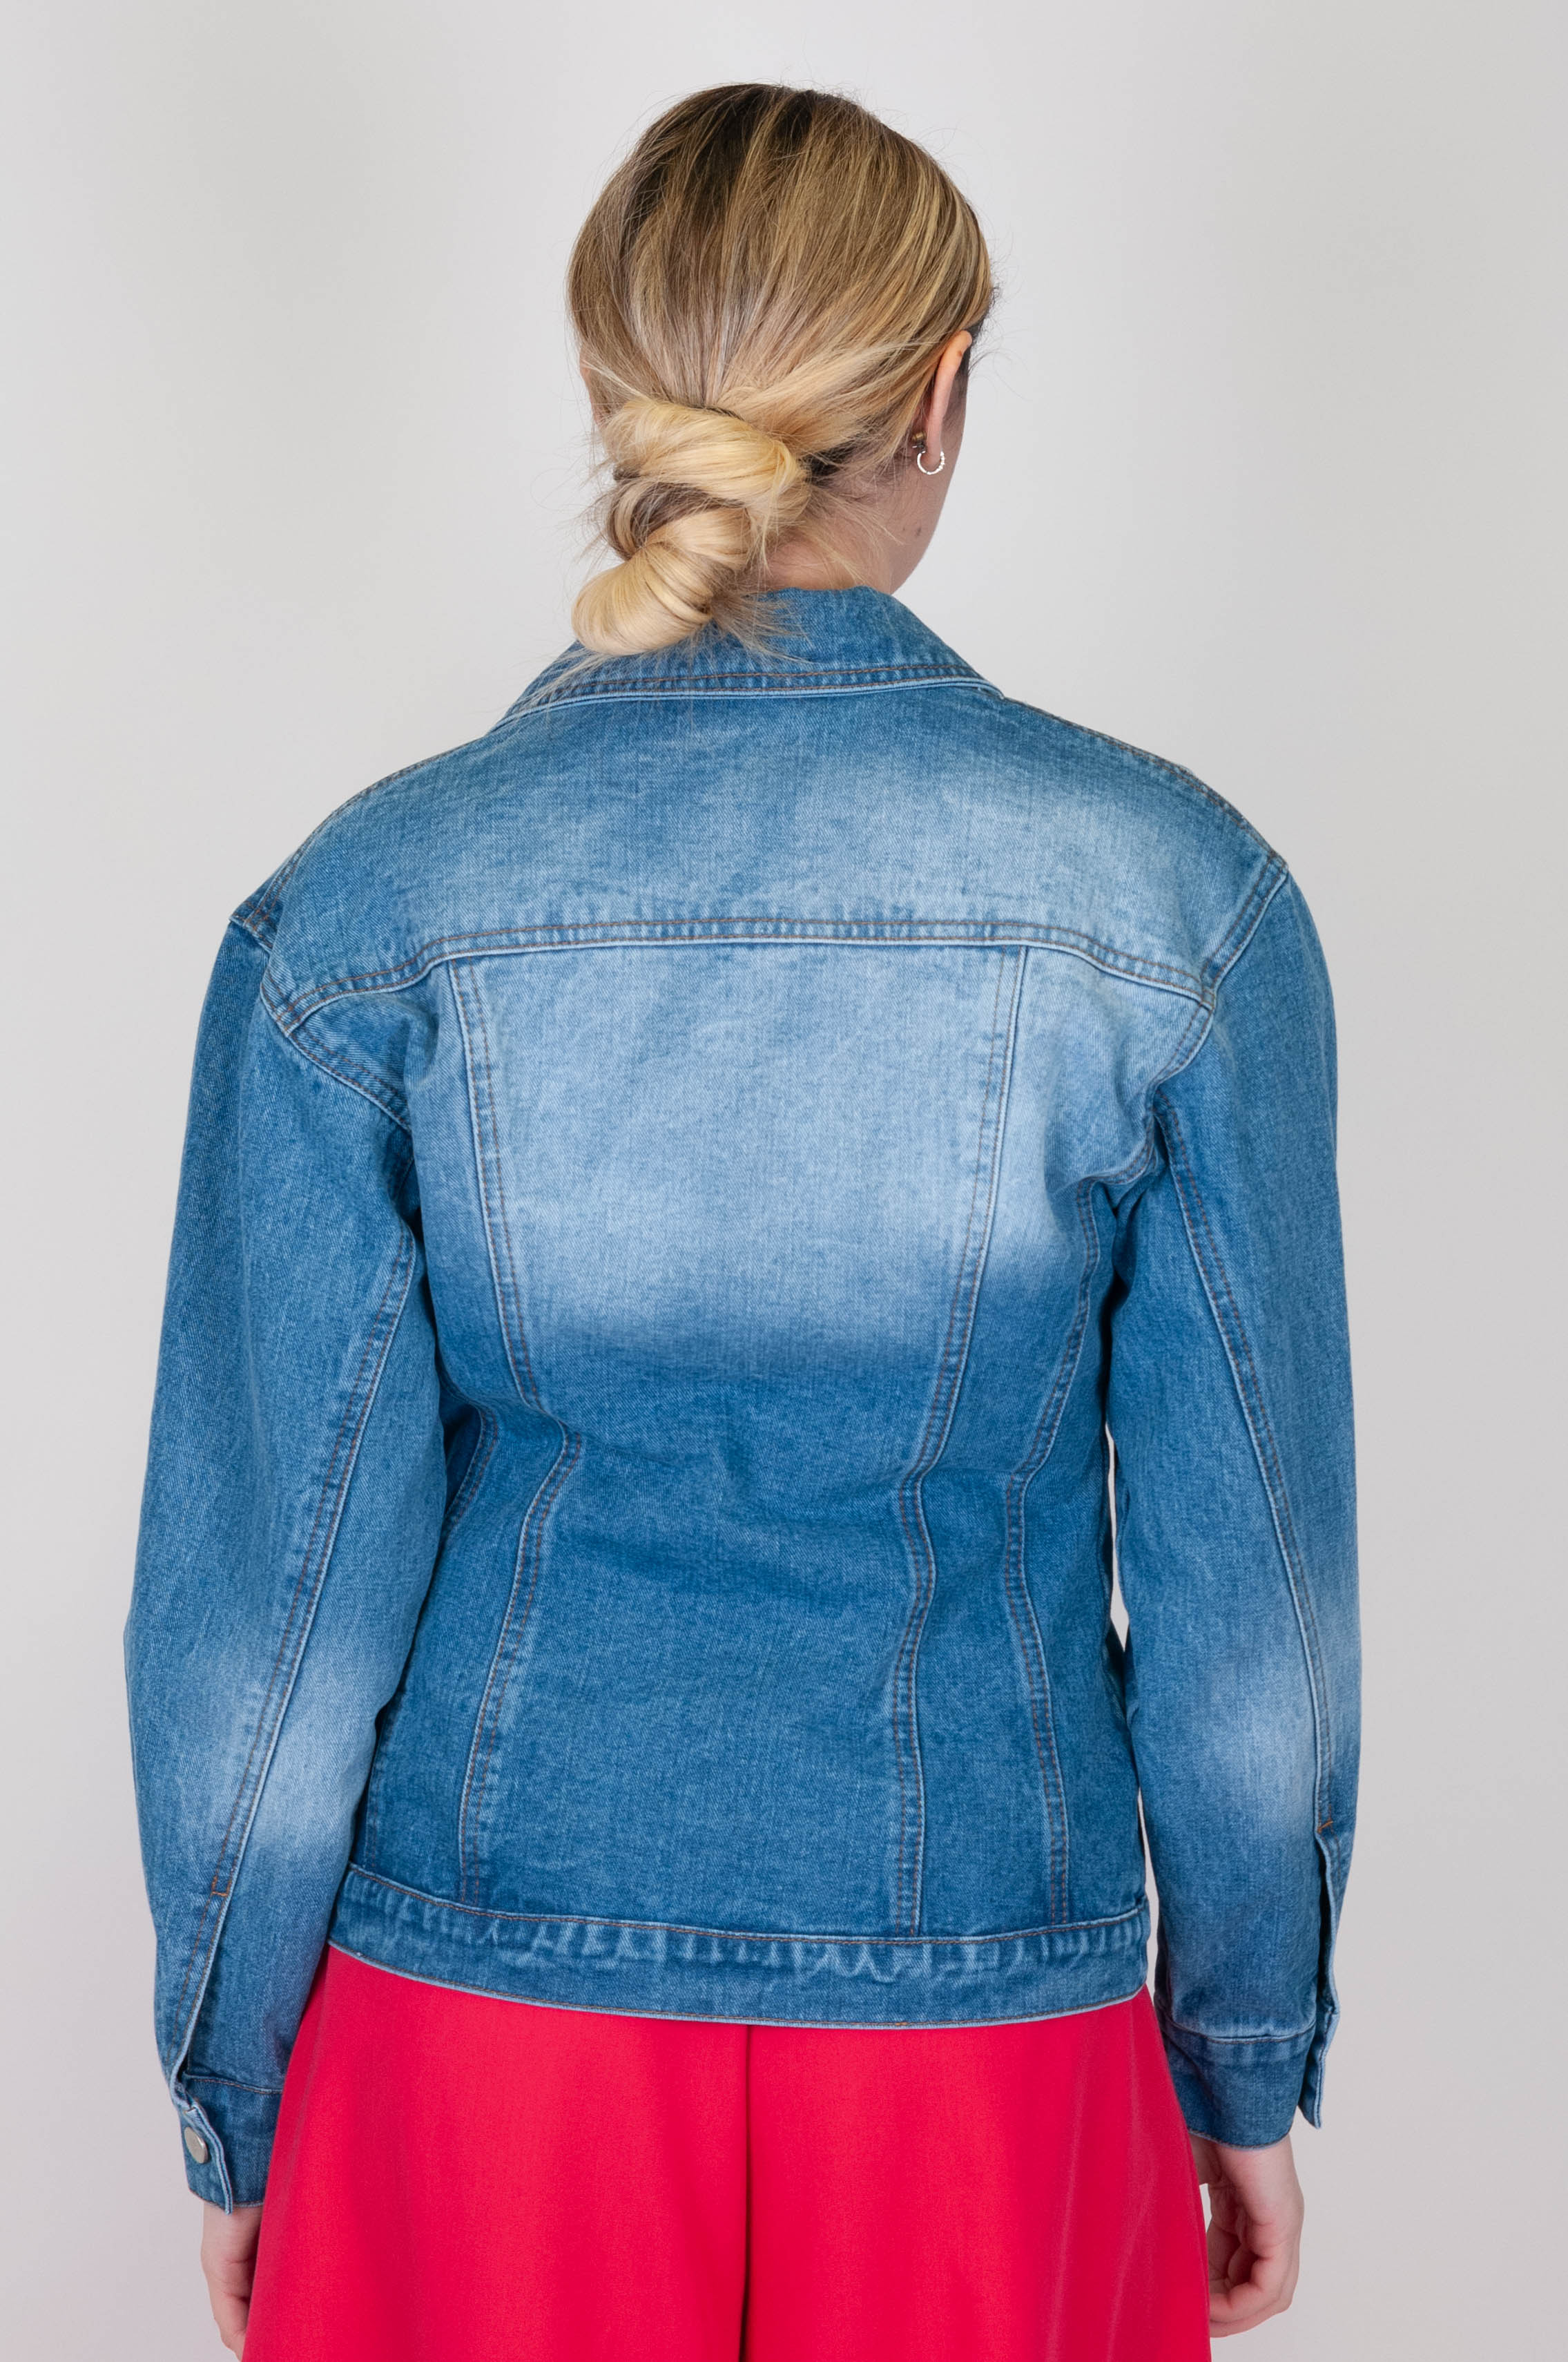 Motel - Denim jacket with buttons and pockets